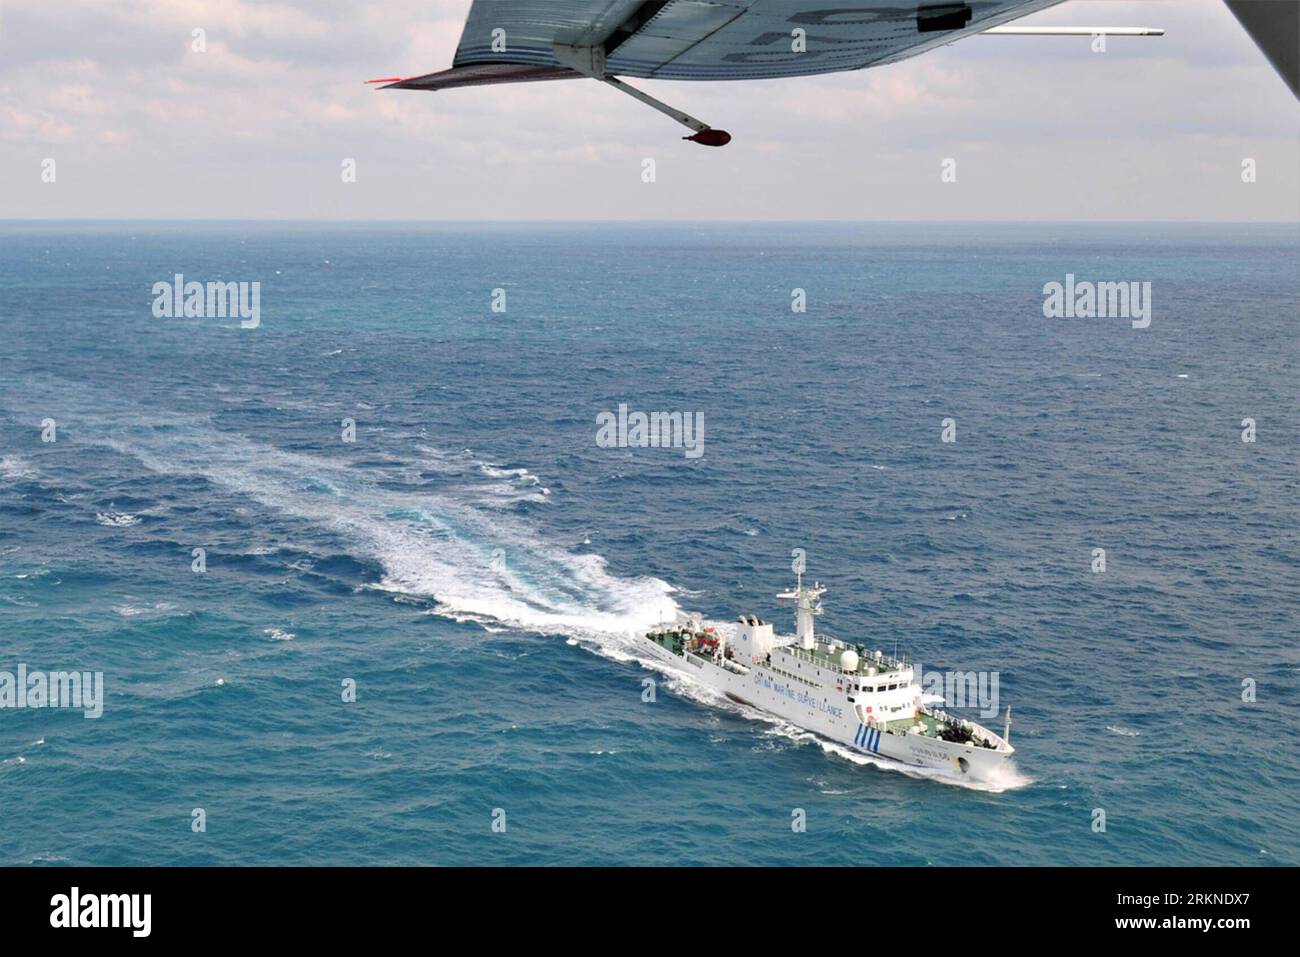 Bildnummer: 57096417  Datum: 21.02.2012  Copyright: imago/Xinhua (120221) -- SHANGHAI, Feb. 21, 2012 (Xinhua) -- Photo provided by China Marine Surveillance shows a Chinese maritime law enforcement boat patroling in China s territorial waters on Feb. 19, 2012. Chinese maritime law enforcers recently identified and expelled two Japanese boats that were caught carrying out illegal surveillance activities in China s territorial waters, maritime authorities said Tuesday. Routine patrols by China Marine Surveillance officers discovered two Japan Coast Guard survey boats in the East China Sea late S Stock Photo